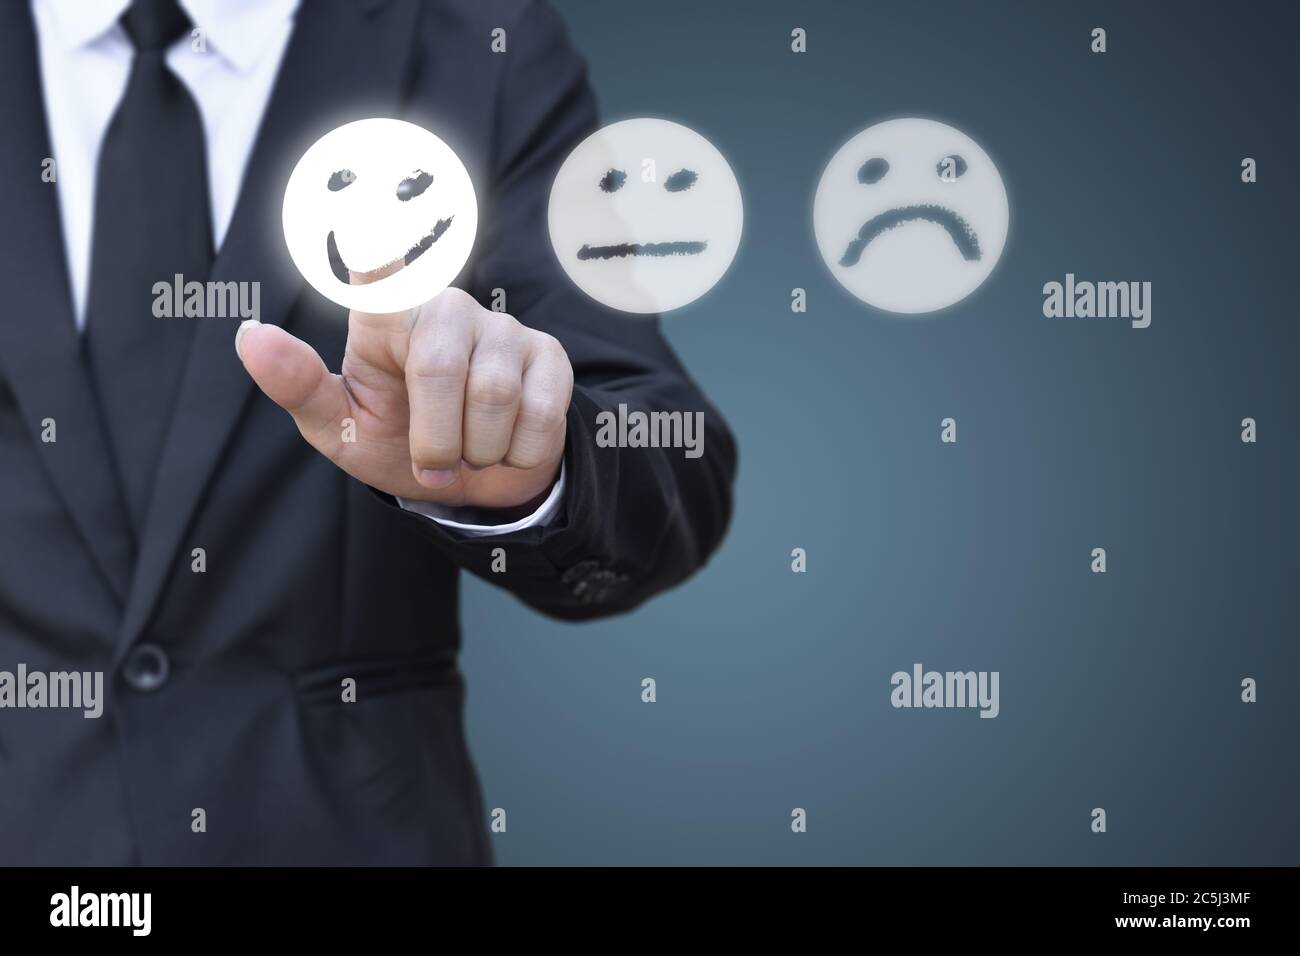 Businessman pressing smiley face icon on virtual screen. Concept of satisfaction evaluation and feedback. Stock Photo